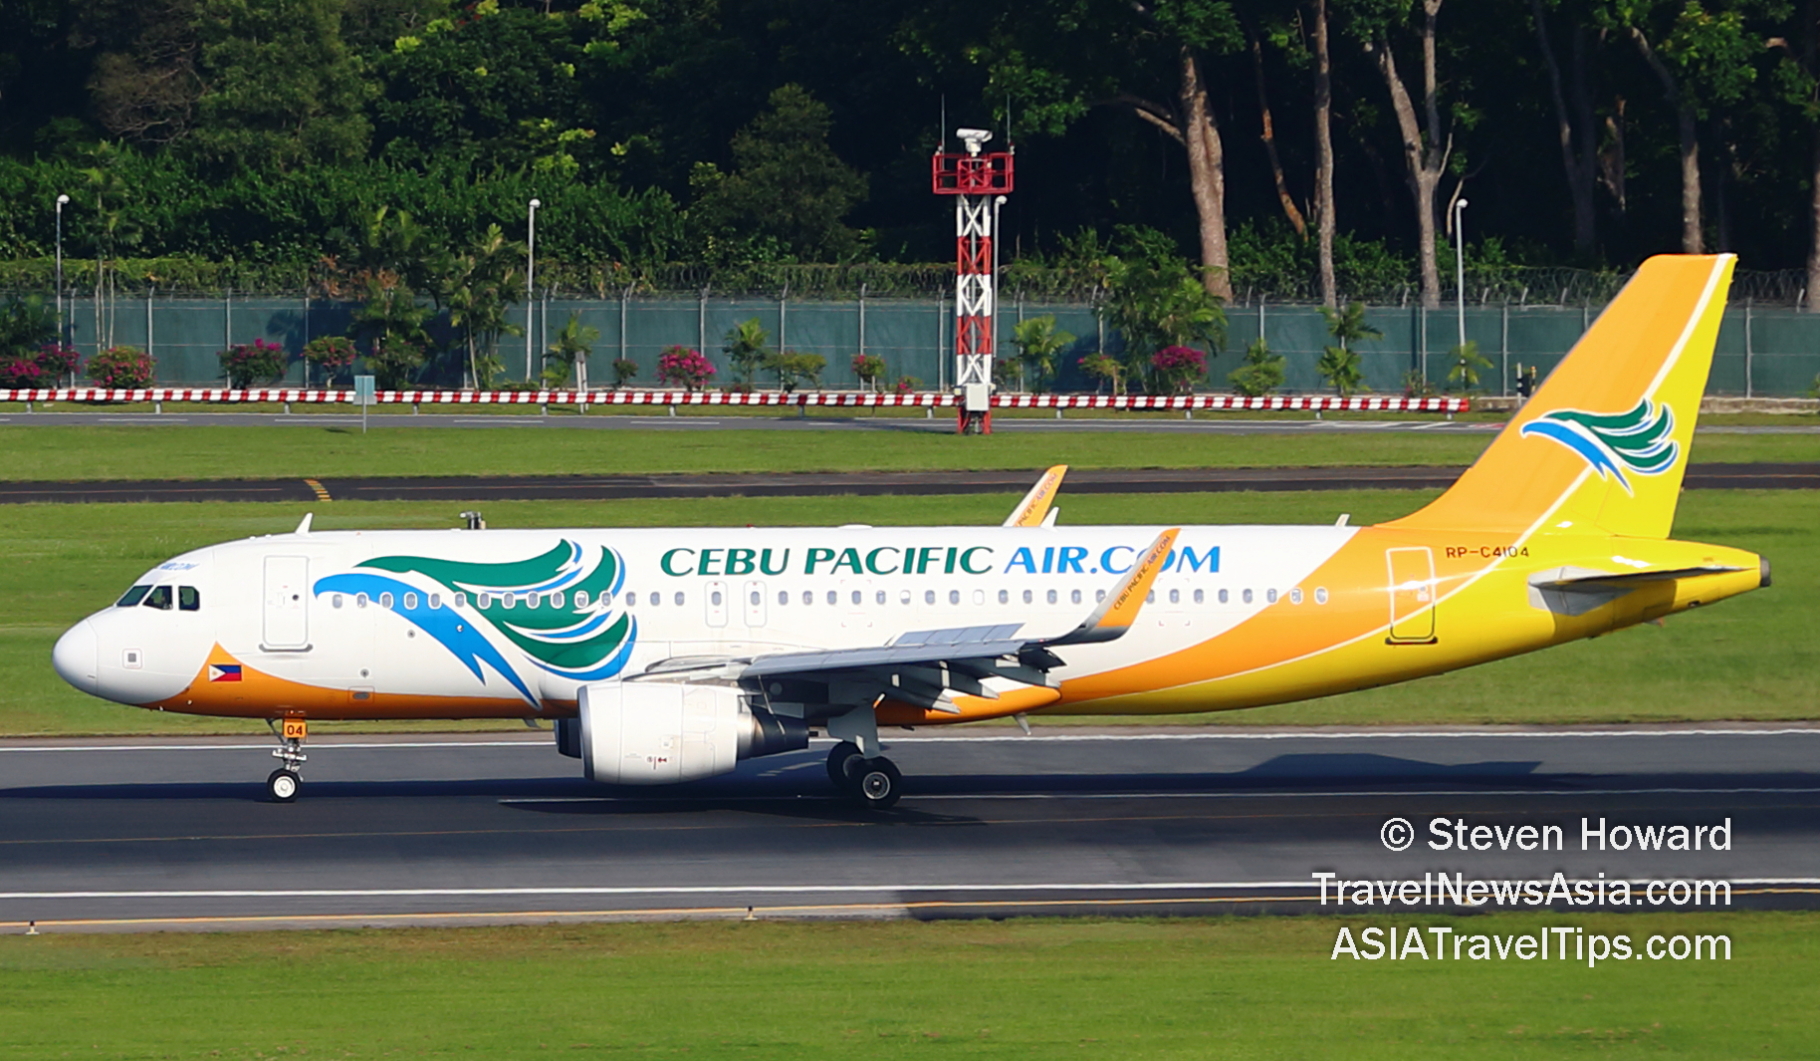 Cebu Pacific A320. Picture by Steven Howard of TravelNewsAsia.com Click to enlarge.